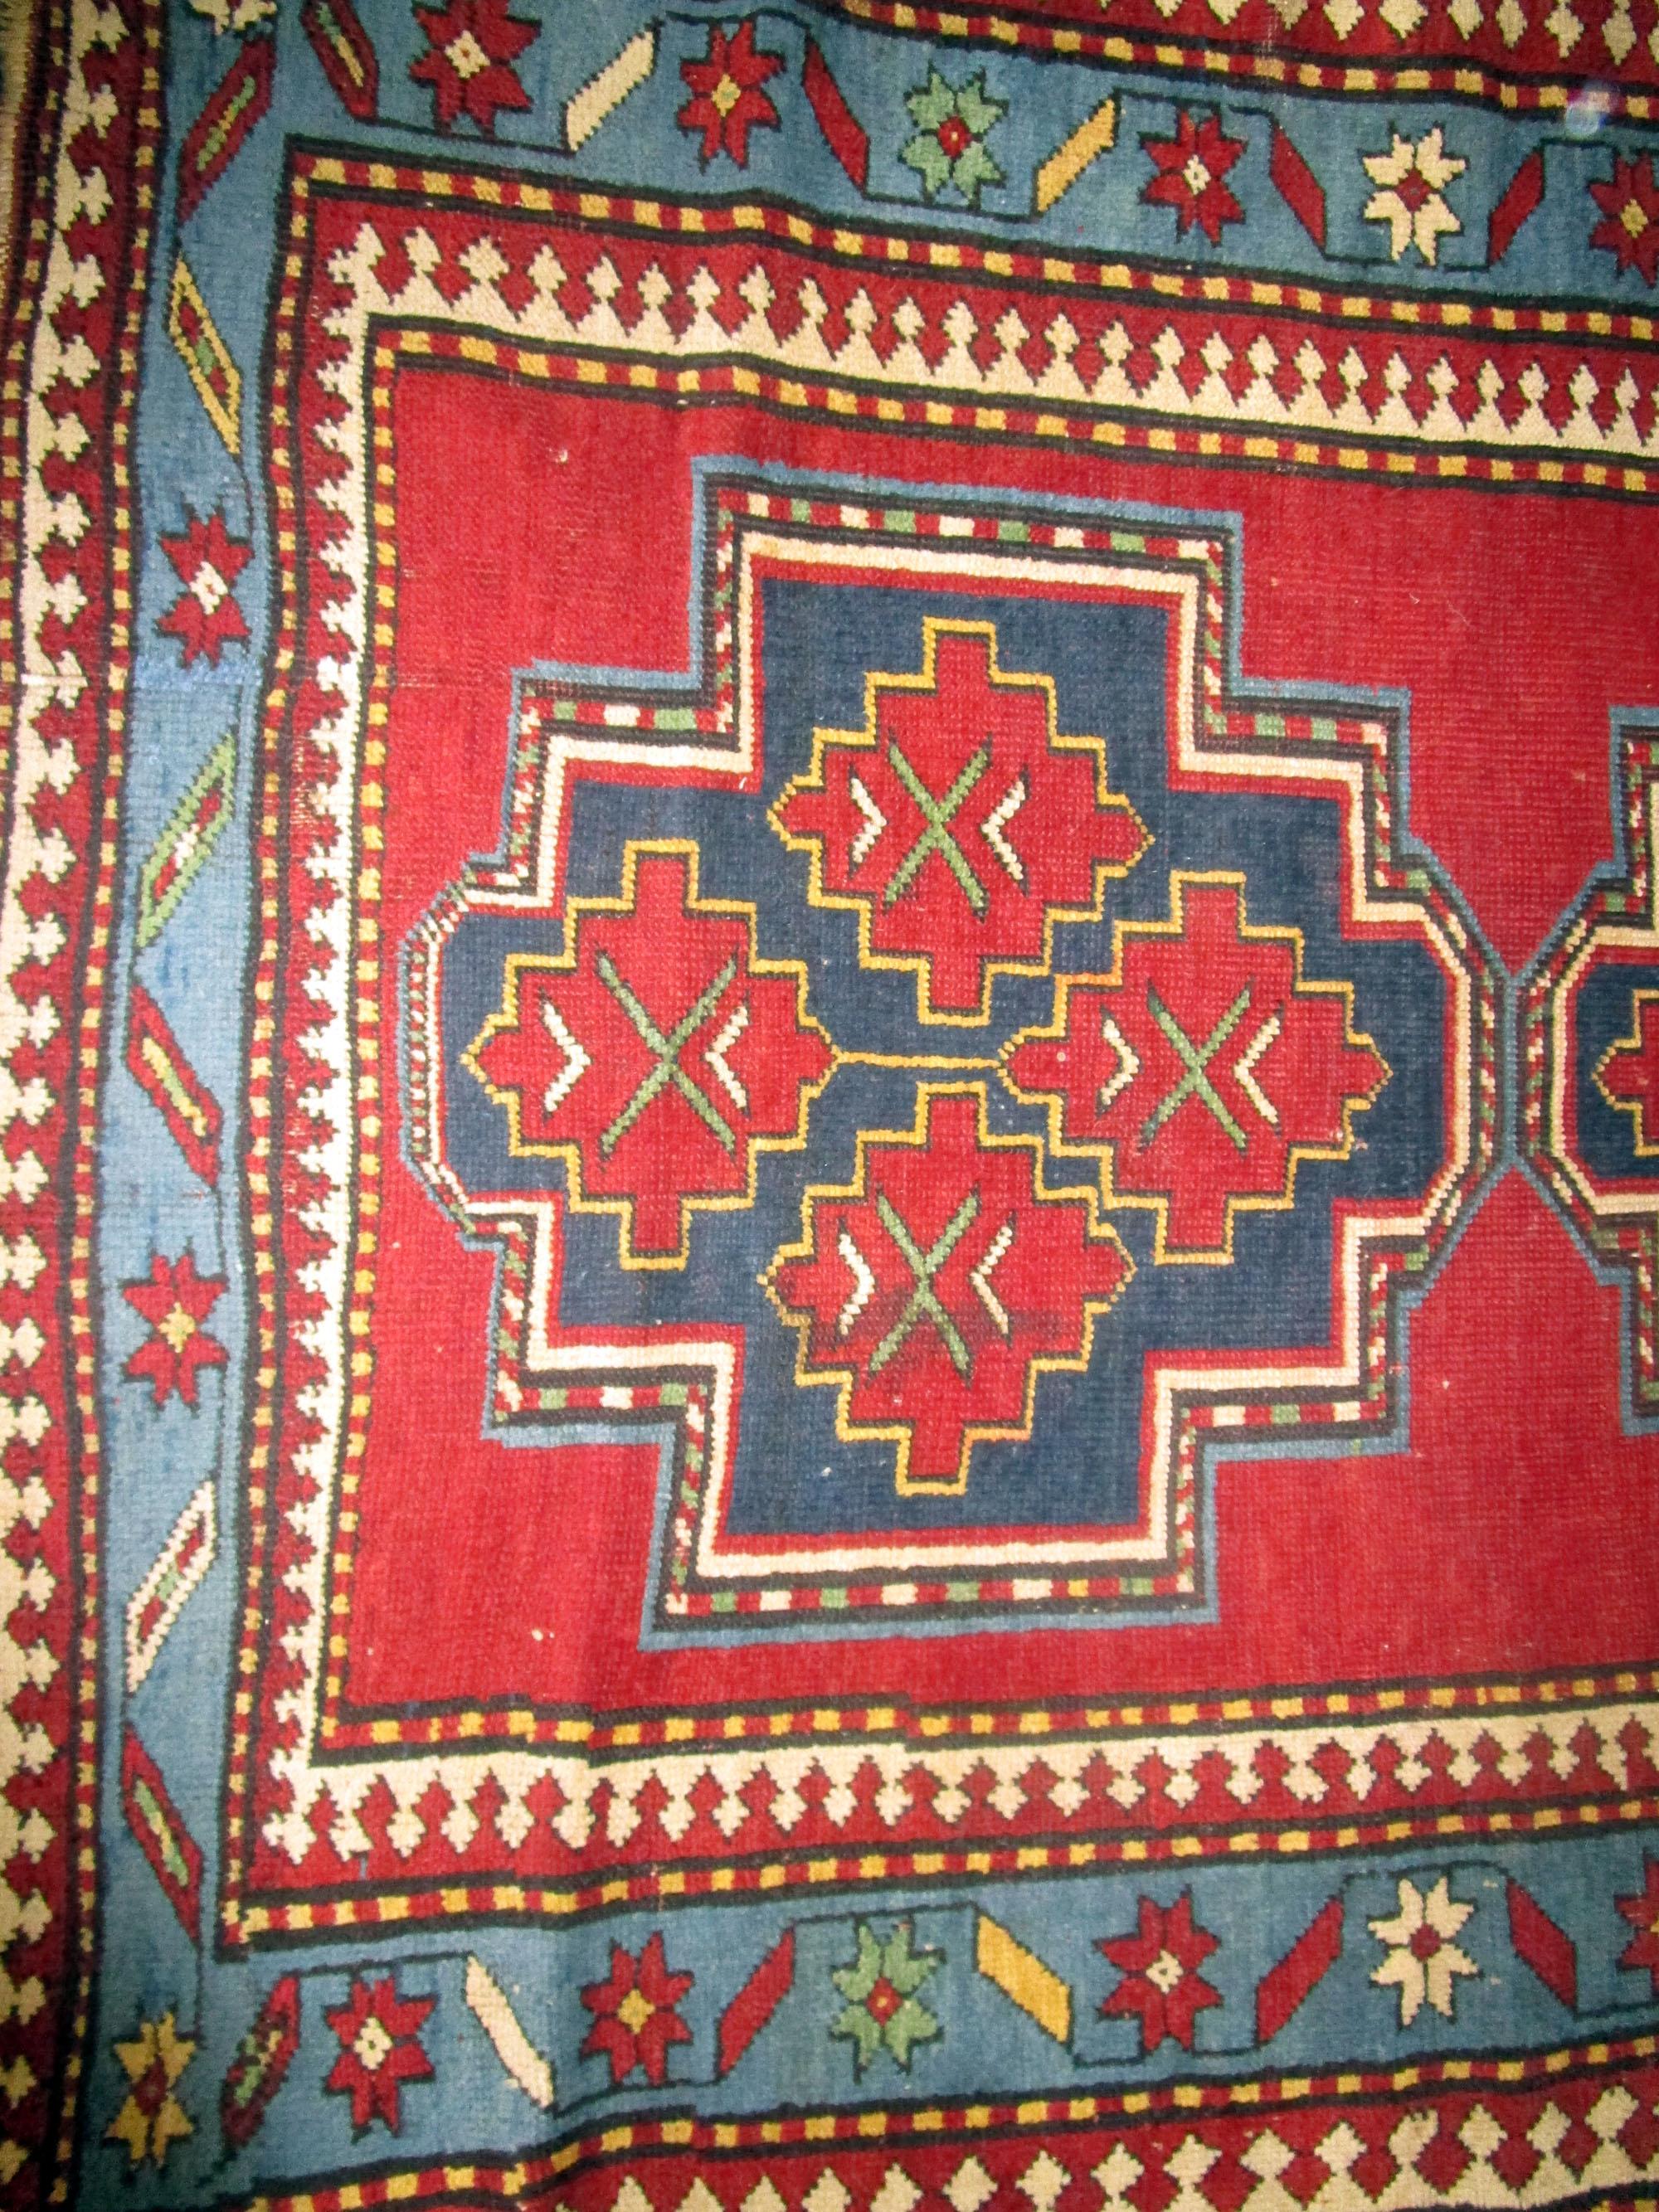 This handsome Kazak rug features a double large, bold, dominating geometric pattern with a smaller patterned within. The detailed borders and backdrop give it an edge that differentiates it from other rugs on the market. The colors used are vibrant